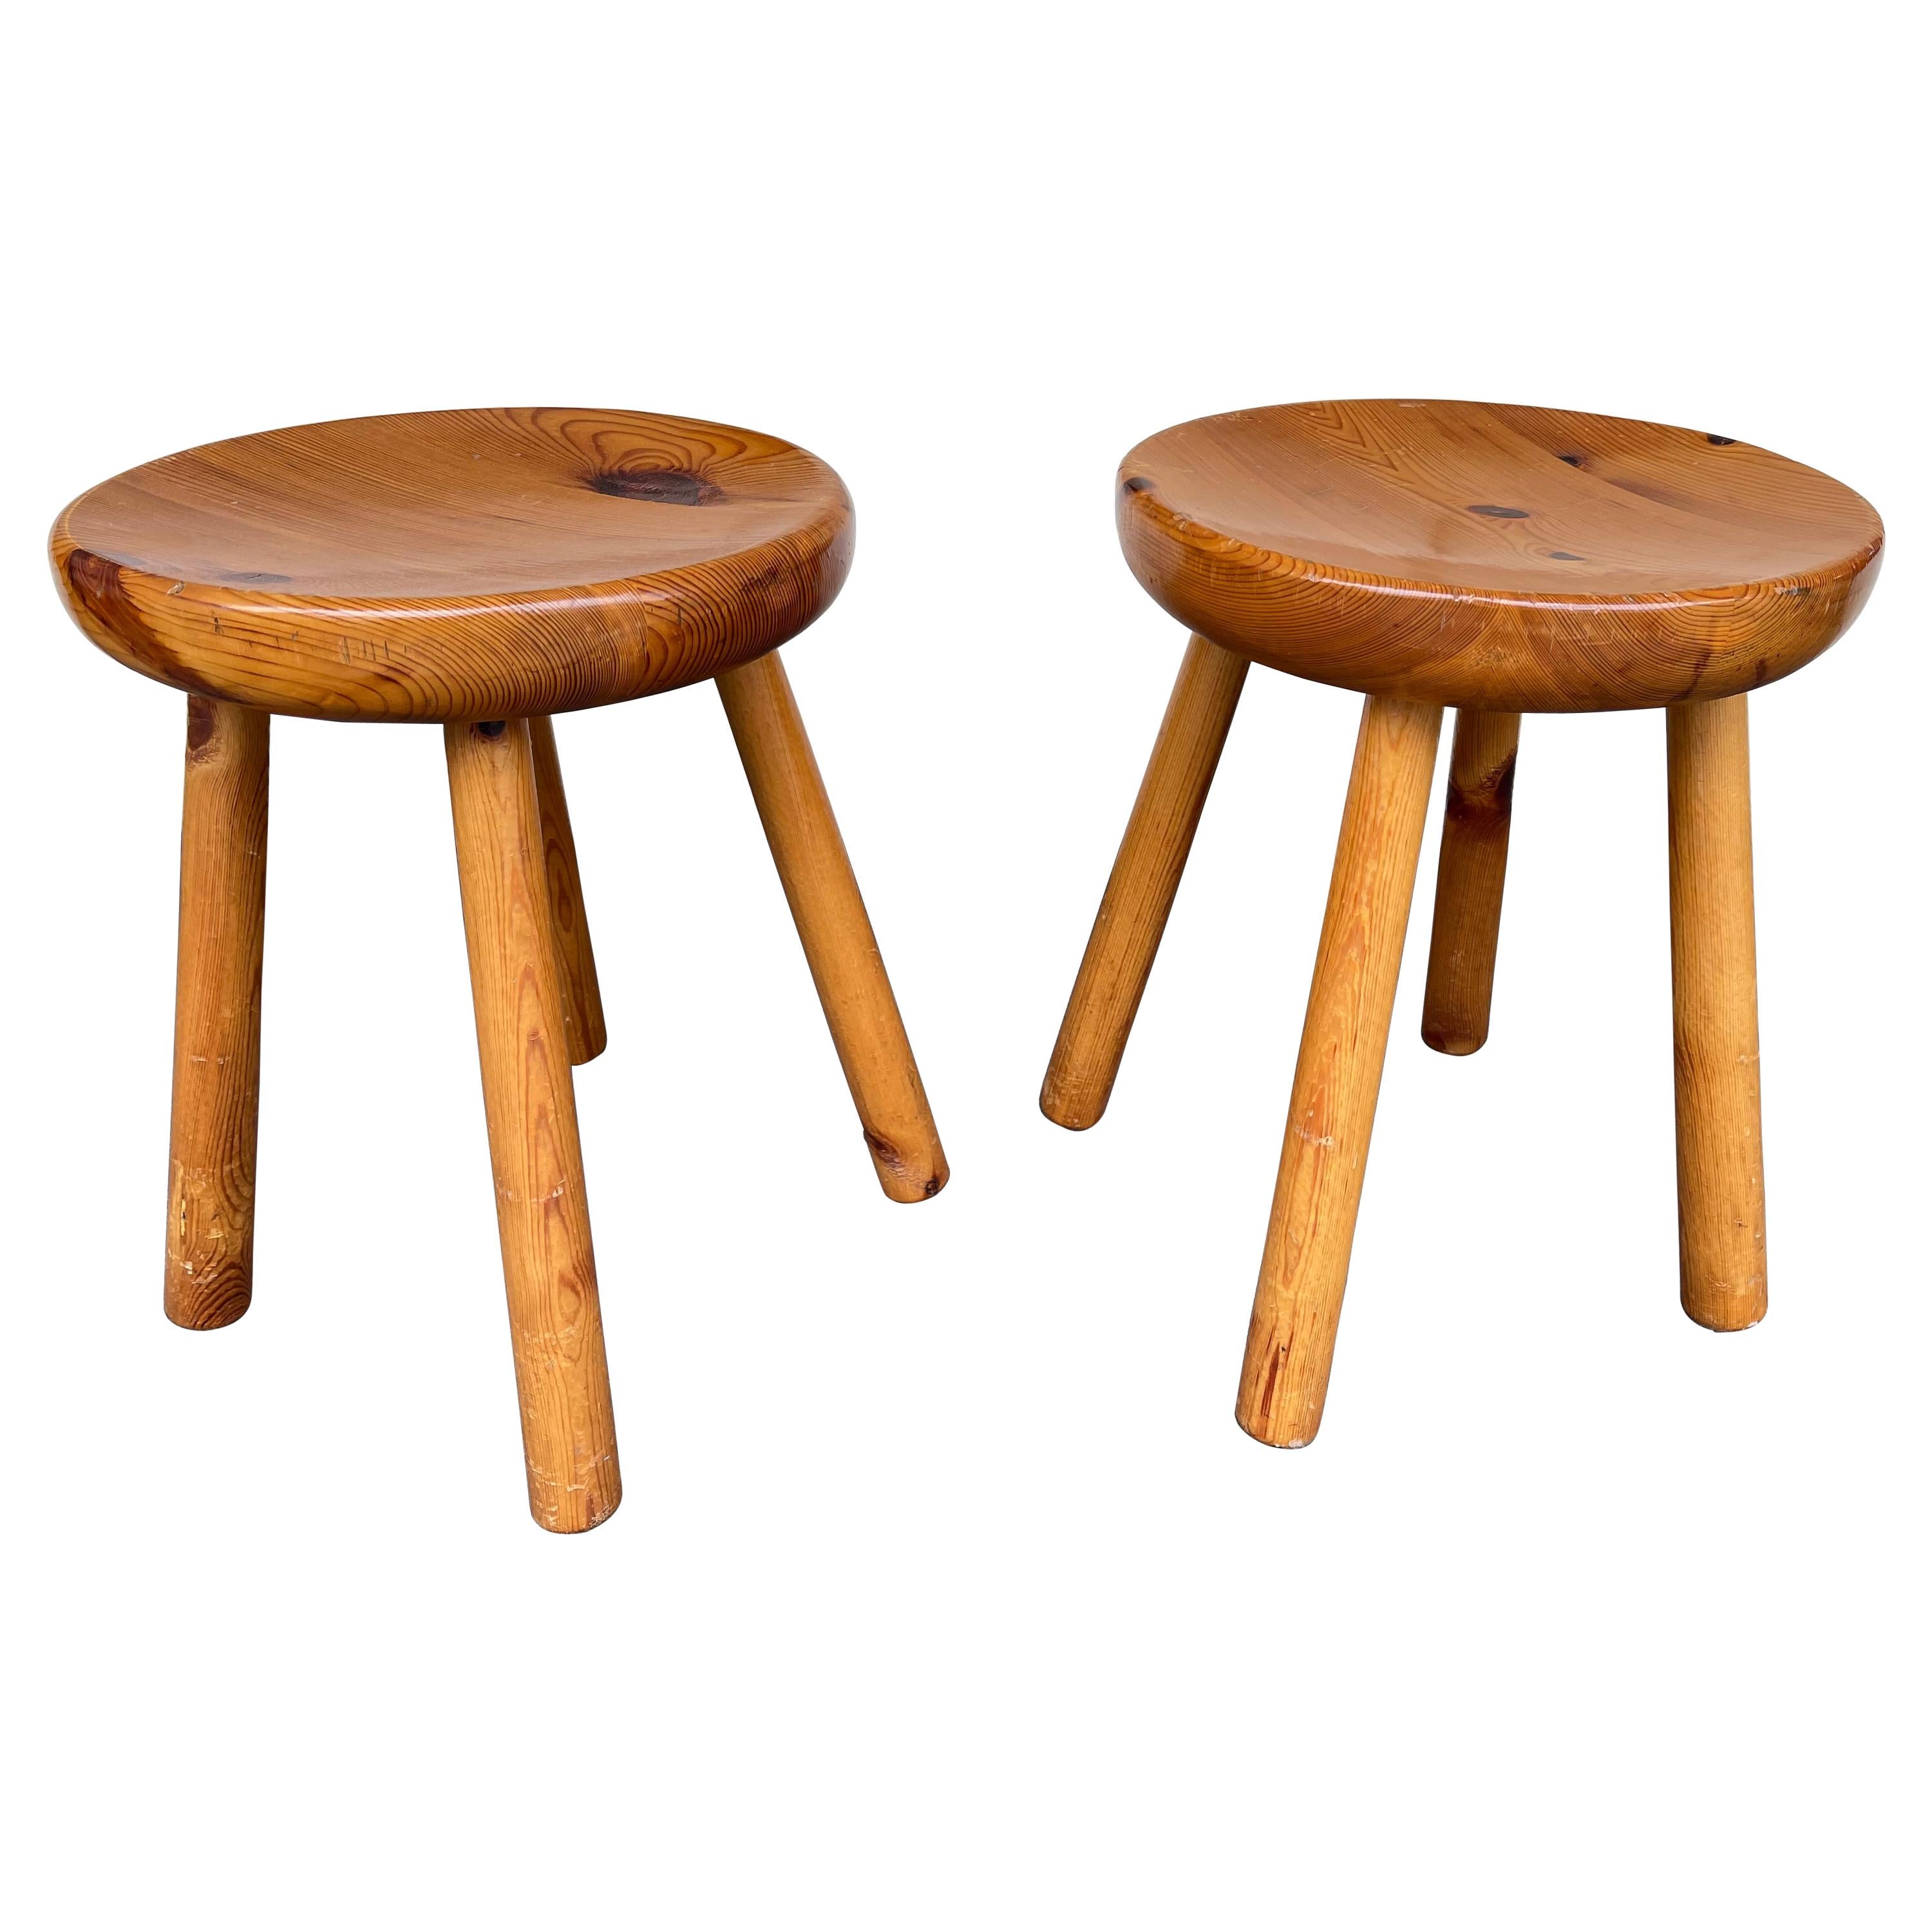 Pair of Pine Stool Attributed to Charlotte Perriand, France, 1960s